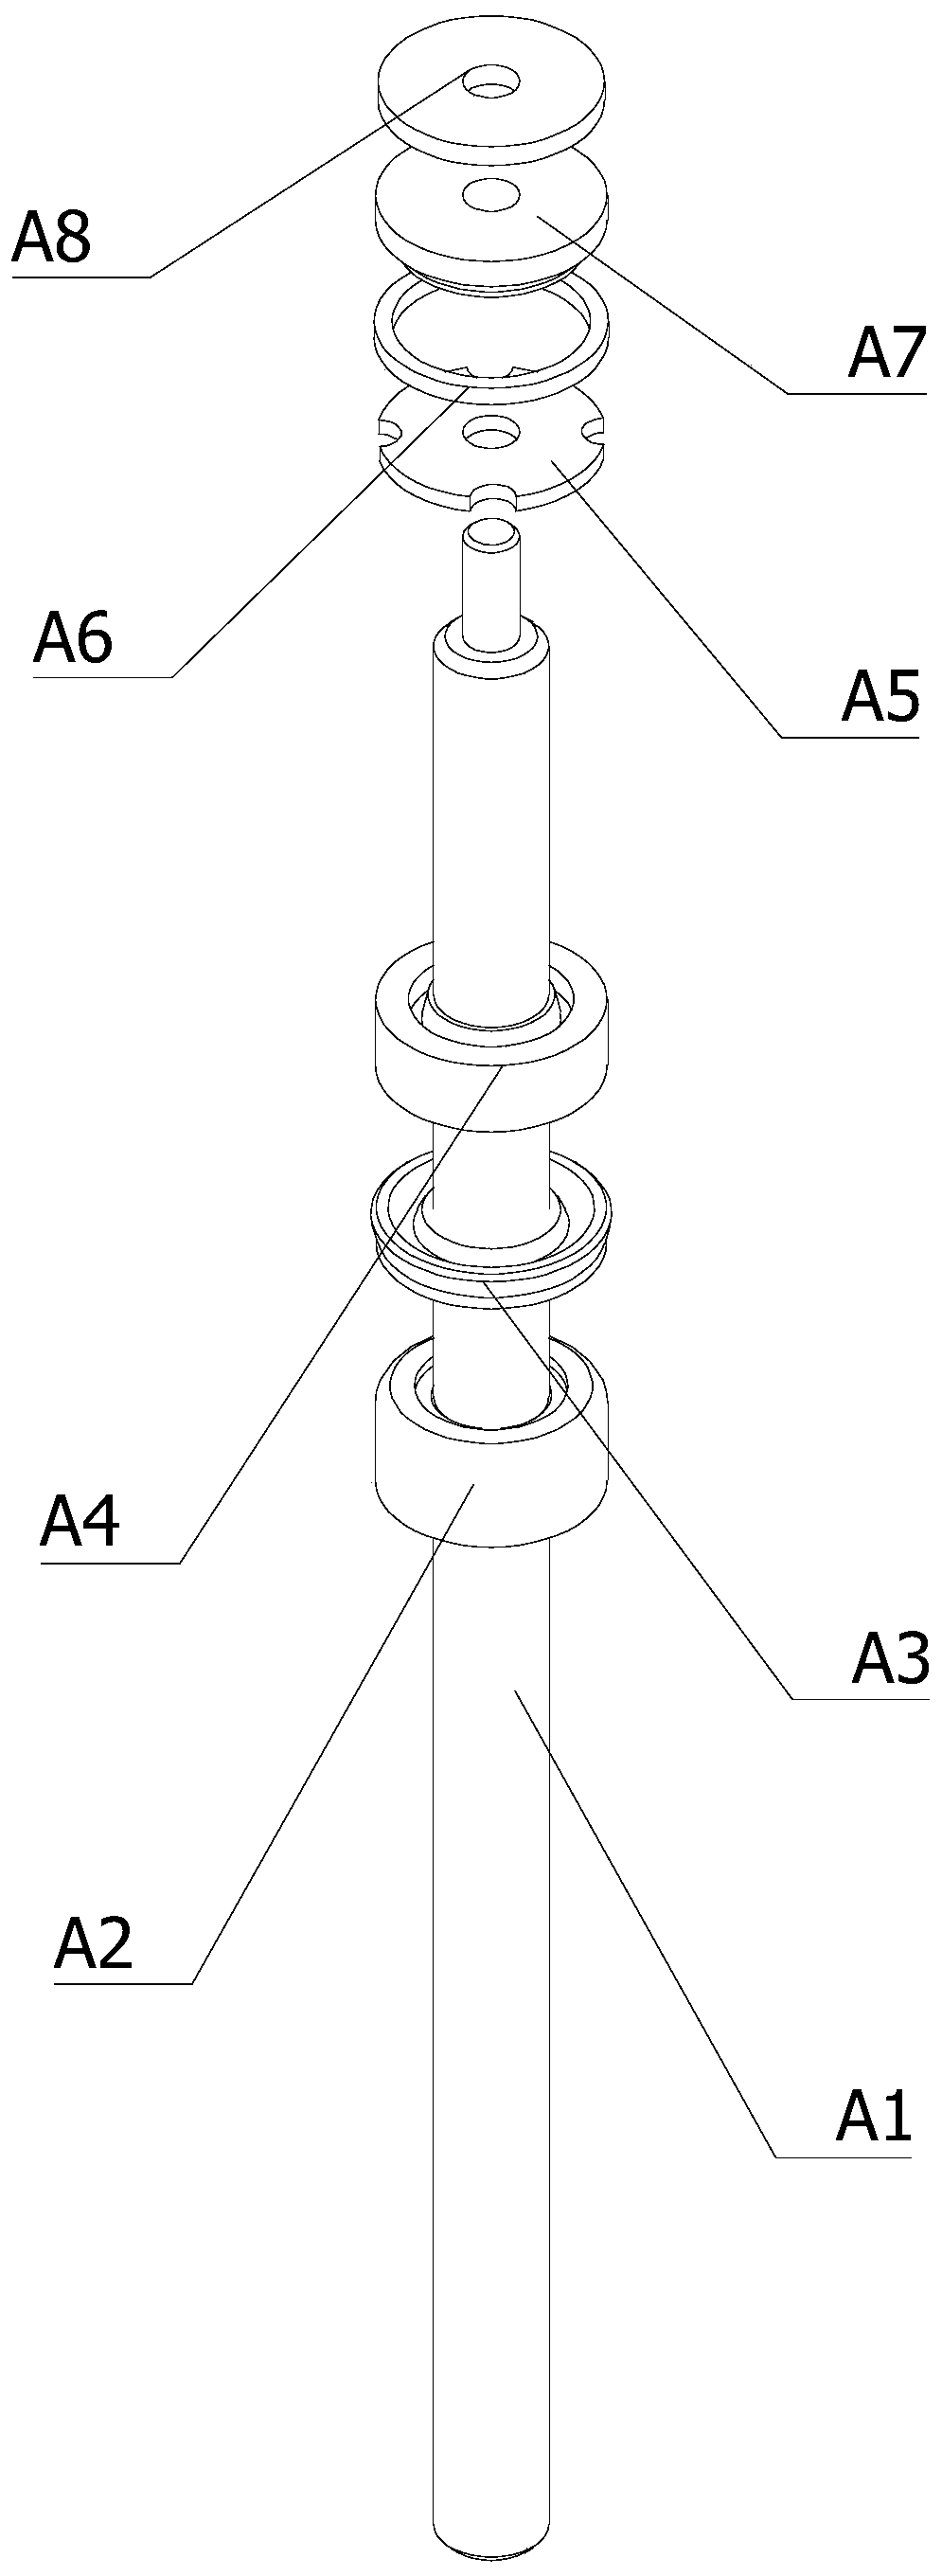 Piston installation mechanism of a gas spring piston rod assembly